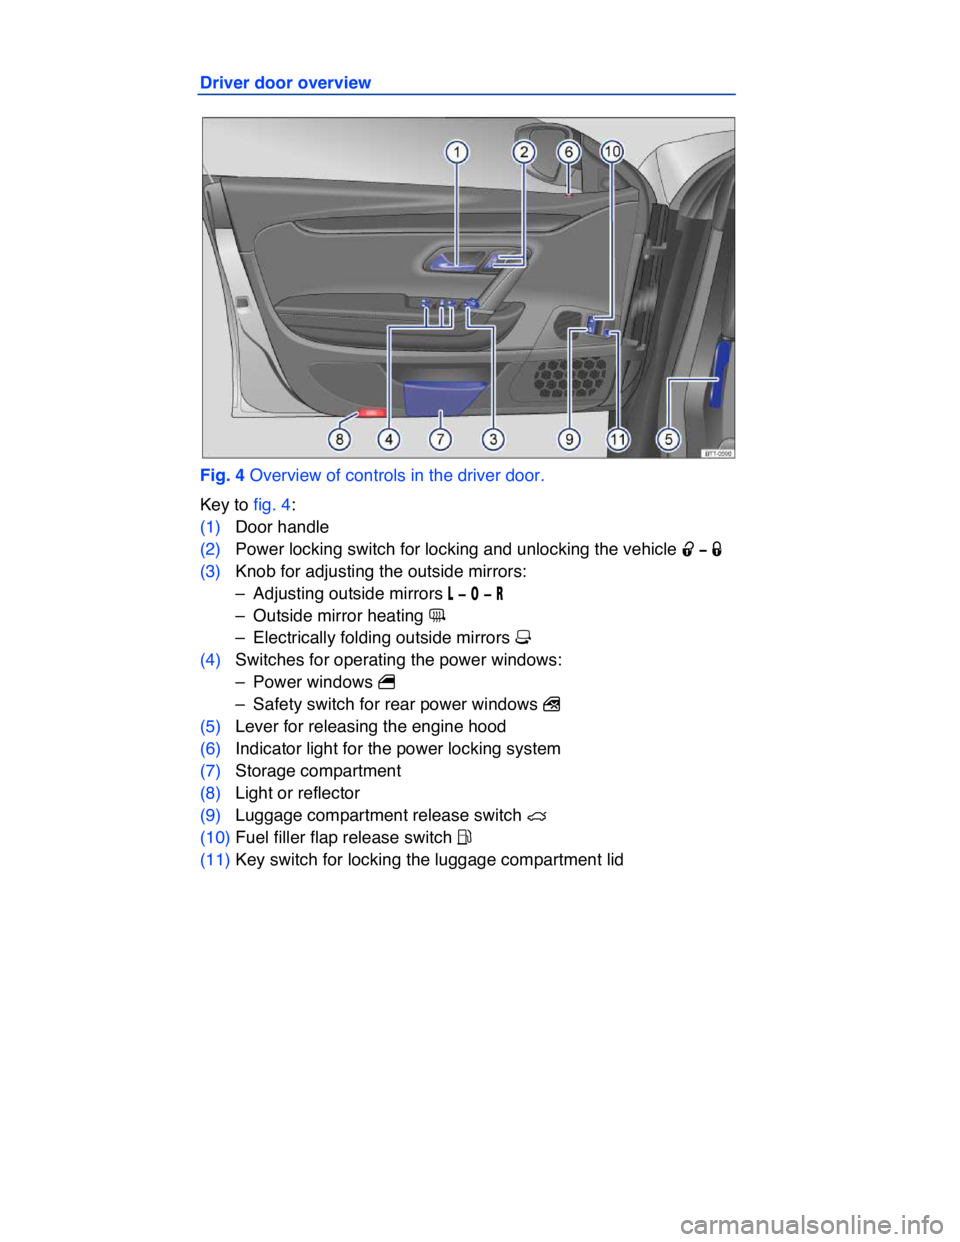 VOLKSWAGEN CC 2008  Owners Manual  
Driver door overview 
 
Fig. 4 Overview of controls in the driver door. 
Key to fig. 4: 
(1) Door handle  
(2) Power locking switch for locking and unlocking the vehicle �0 �